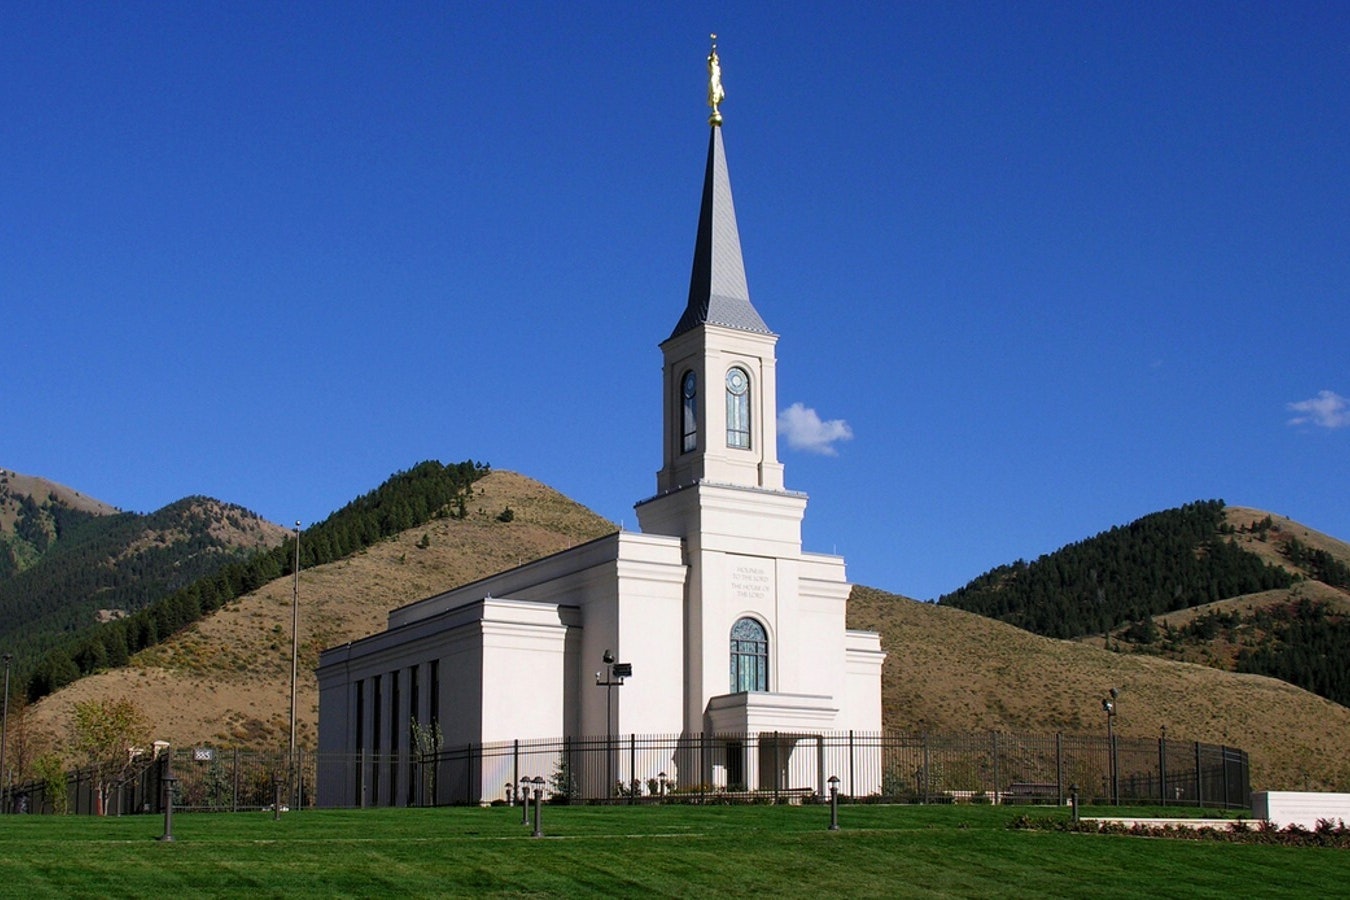 The Church of Jesus Christ of Latter-day Saints temple in Star Valley, Wyoming. The church is in a legal tug-of-war to build a temple in Cody.